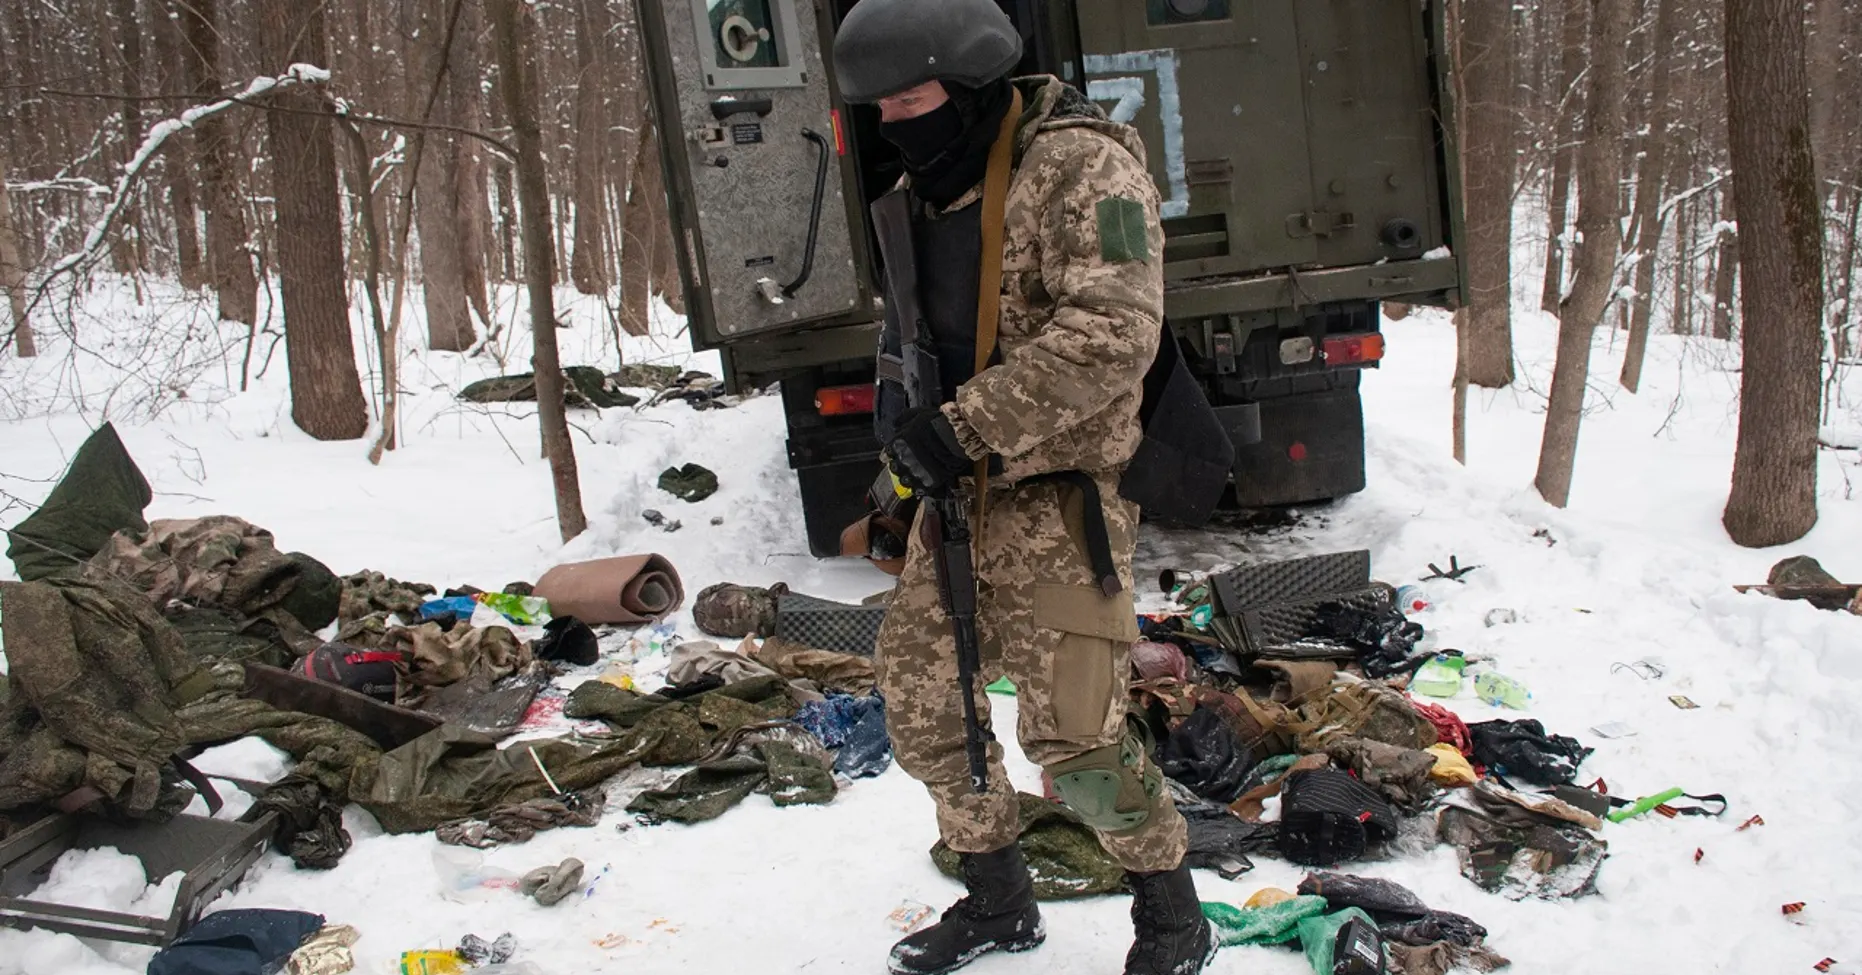 Fox News: Ukraine counterattack ‘successfully’ in Kharkiv, possibly pushing to the Russian border